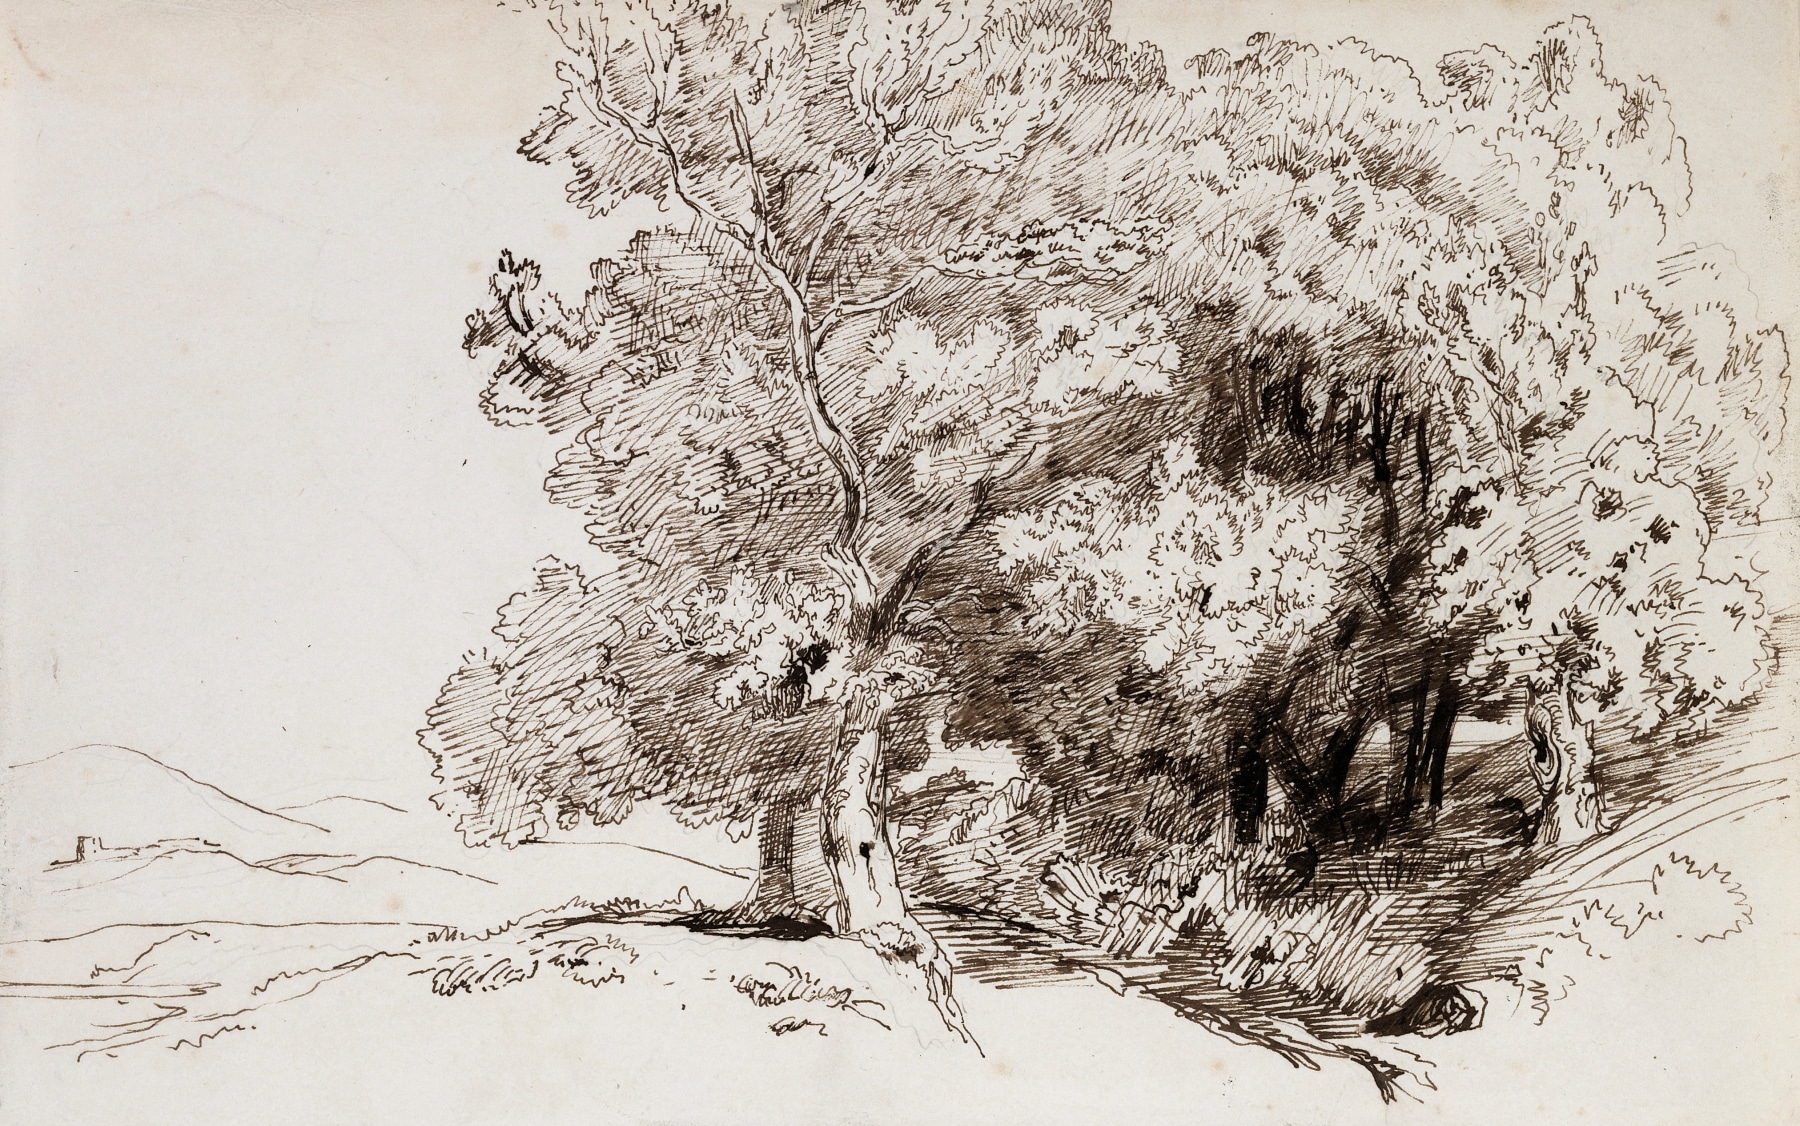 Paul Huet  A Copse of Trees with a Town in the Distance  Pen and ink on paper 8 5/8 x 13 9/16 inches